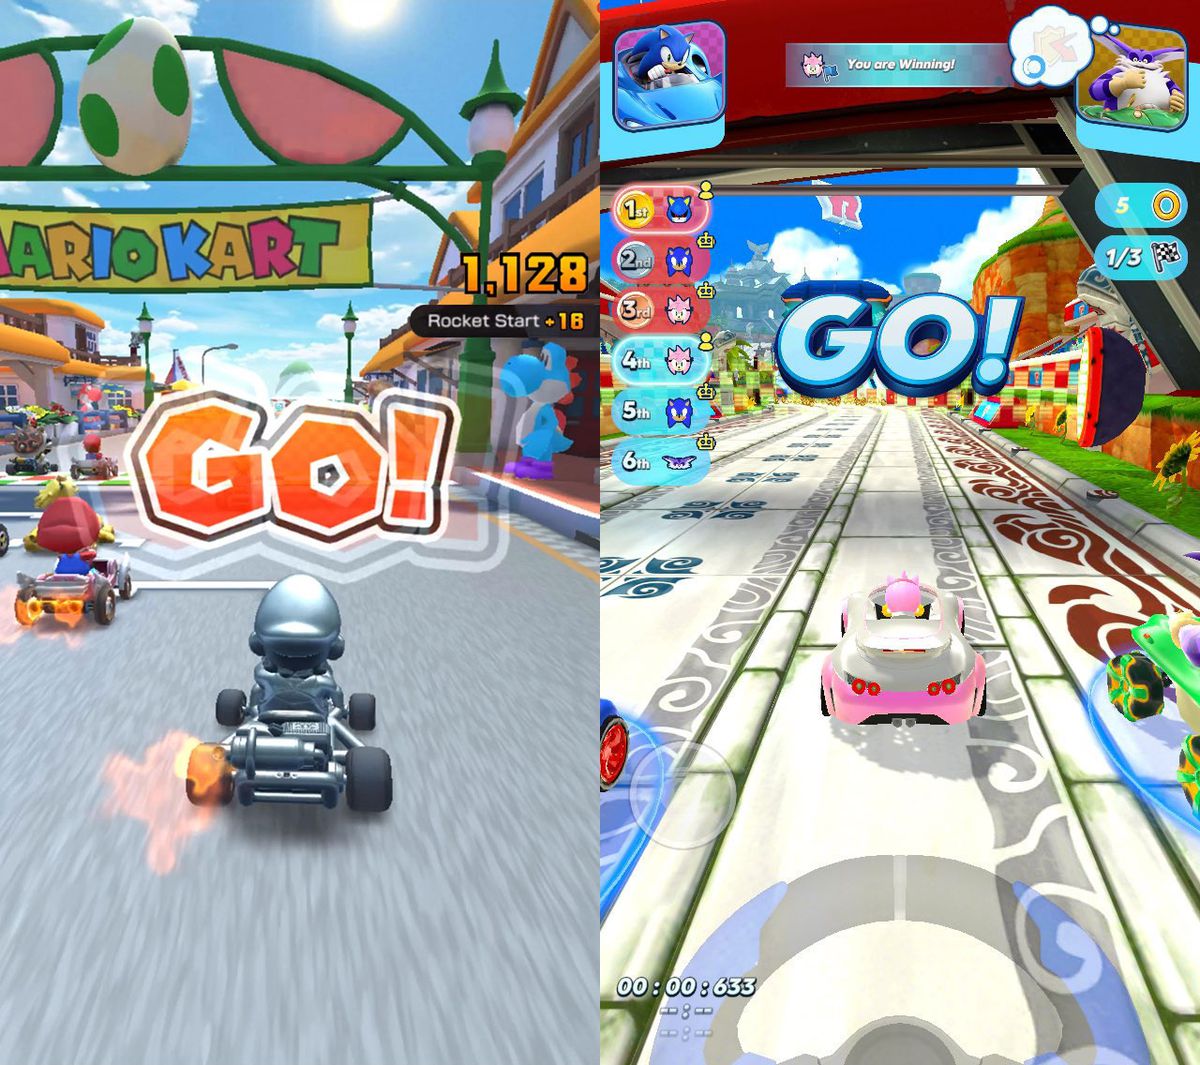 A race begins in Mario Kart Tour on the left side, and Sonic Racing on the right side.